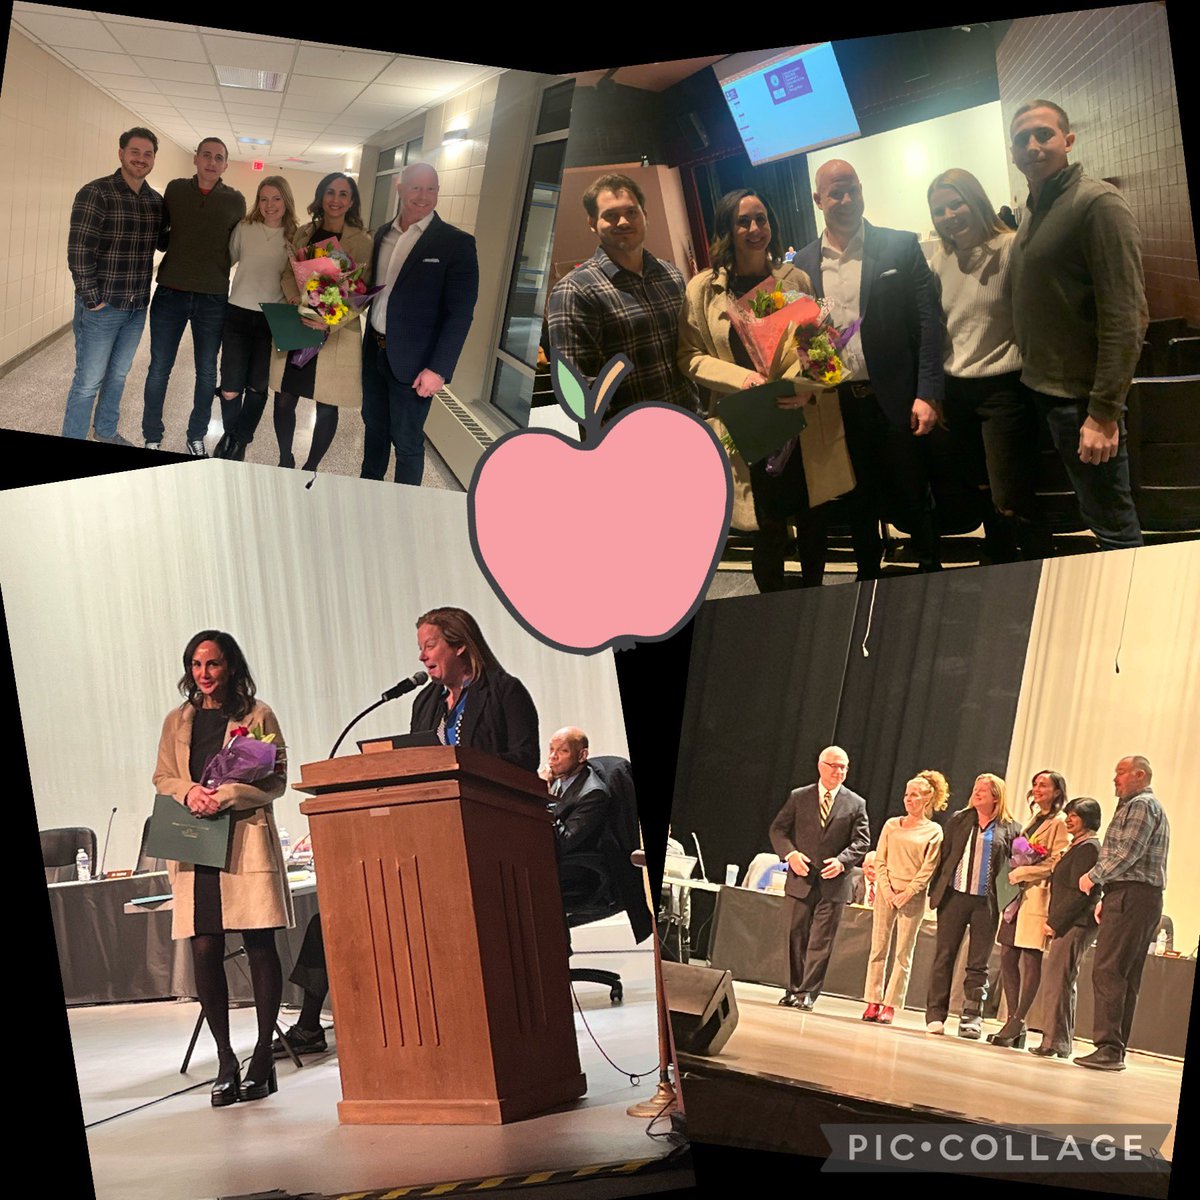 Congratulations to Mrs. Sonnie @MTL_HSMath on being honored at the BOE meeting for being named Hillside’s #GEOY. It was a great evening to celebrate all of the MTL #GEOYs!